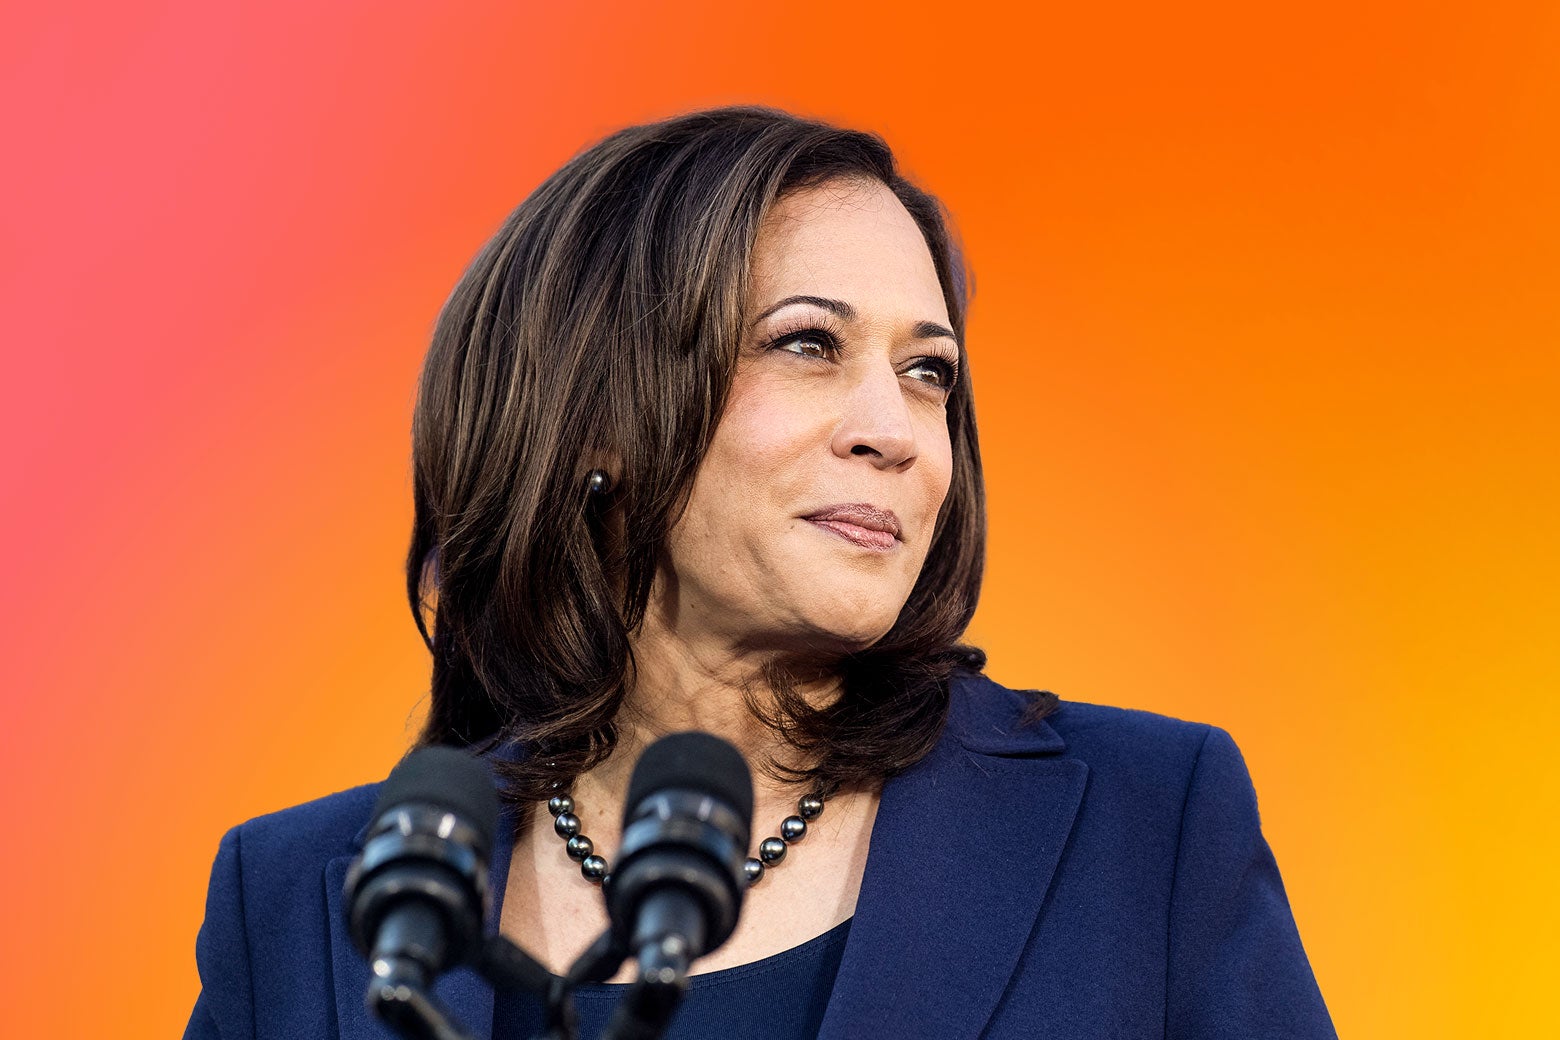 Incredibly Gross Attacks on Kamala Harris Are Starting to Gain Traction